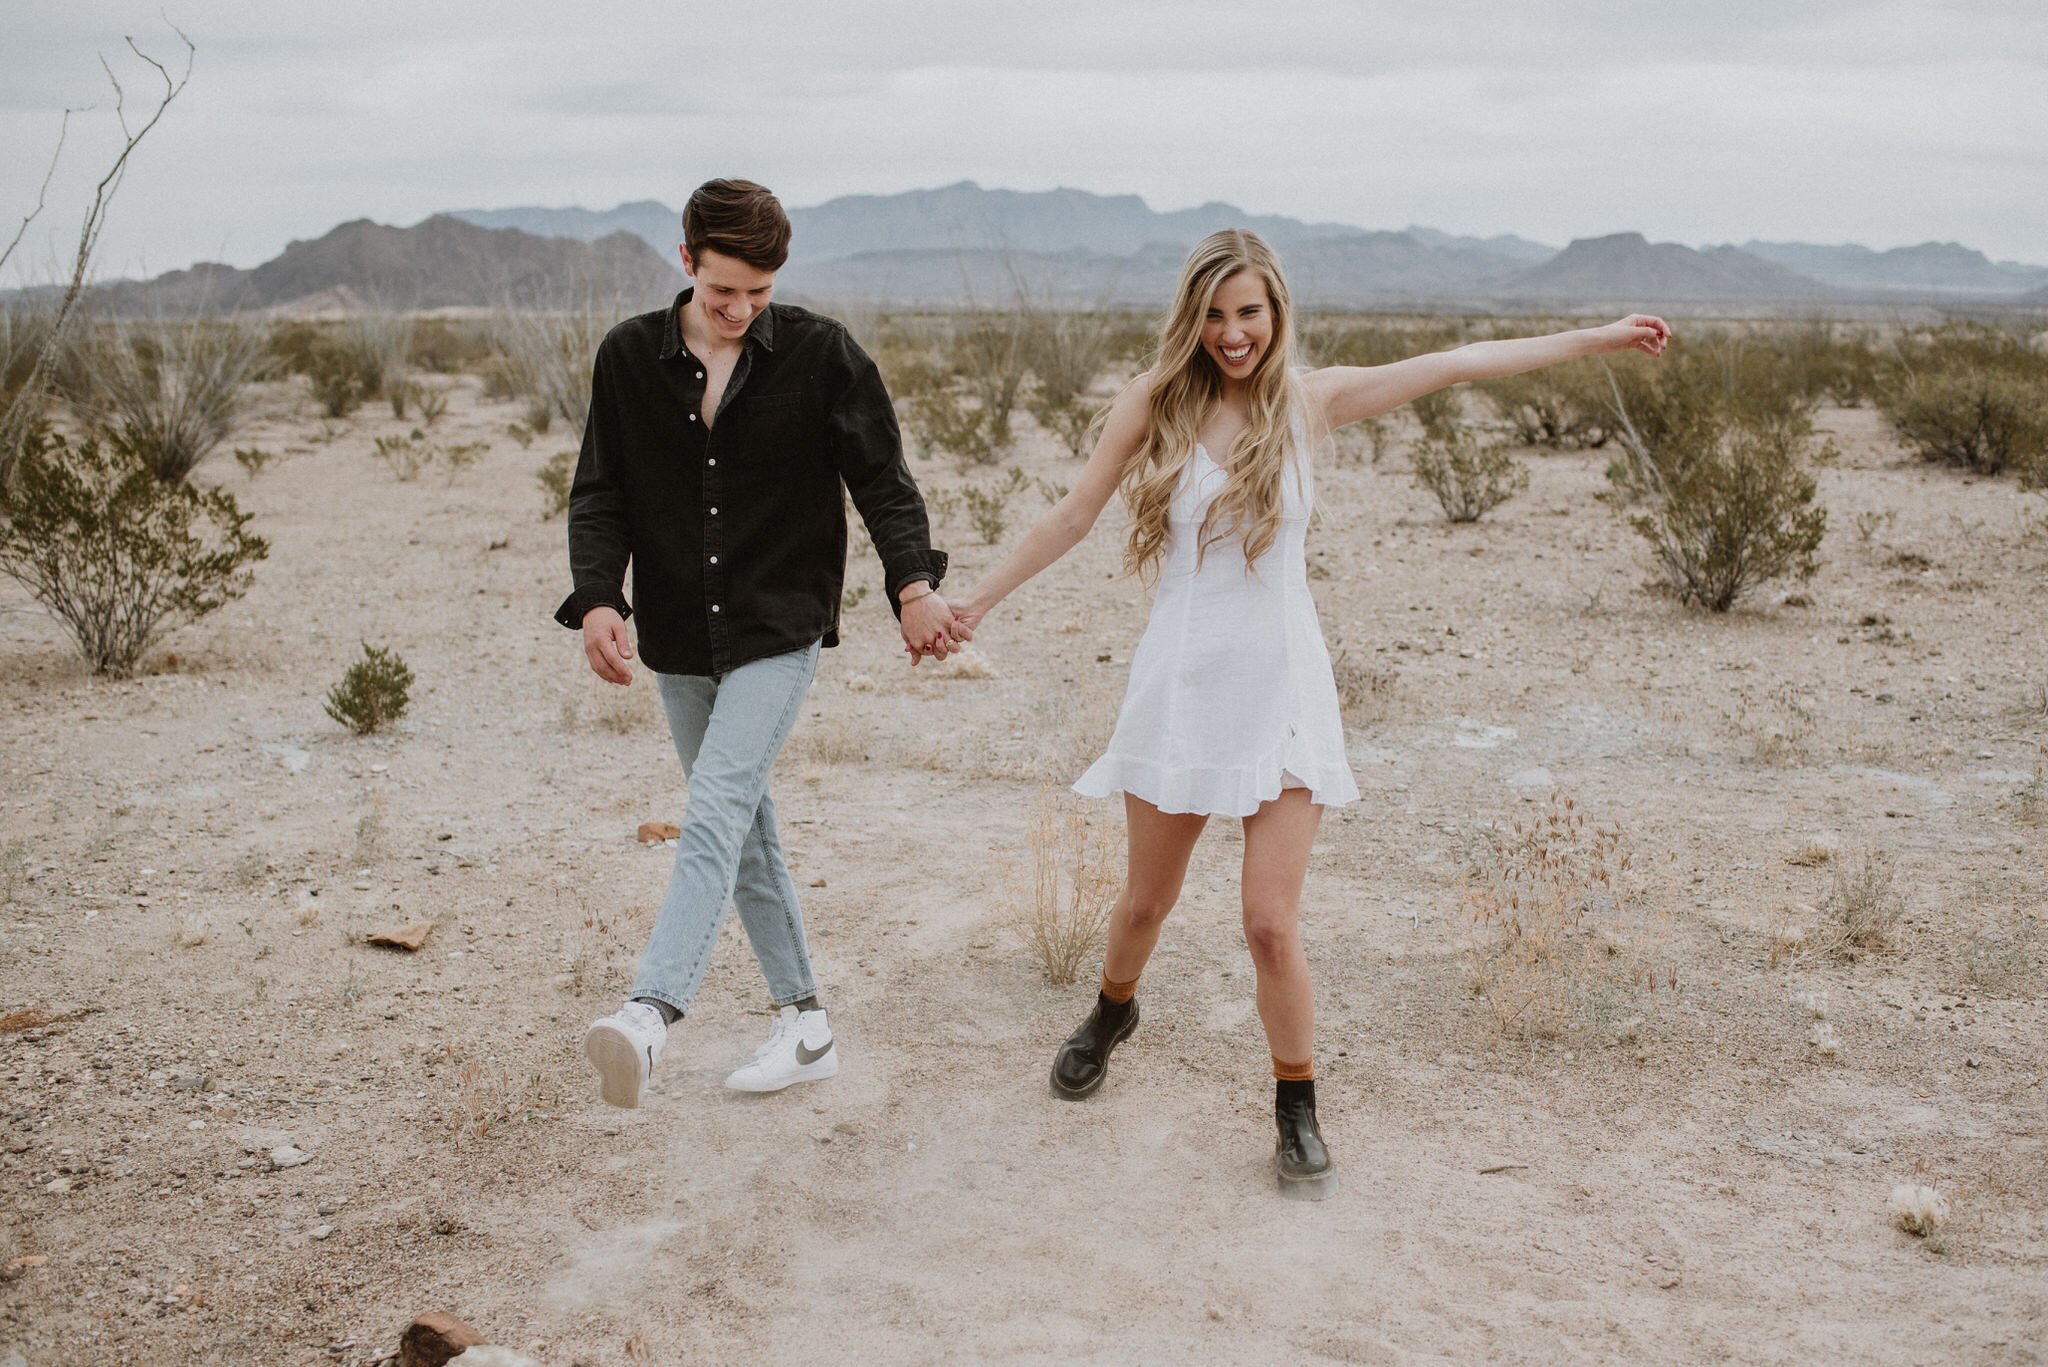 Kaylie-Sirek-Photography-Big-Bend-National-Park-Texas-Engagement-Session-Styled-You-029.jpg